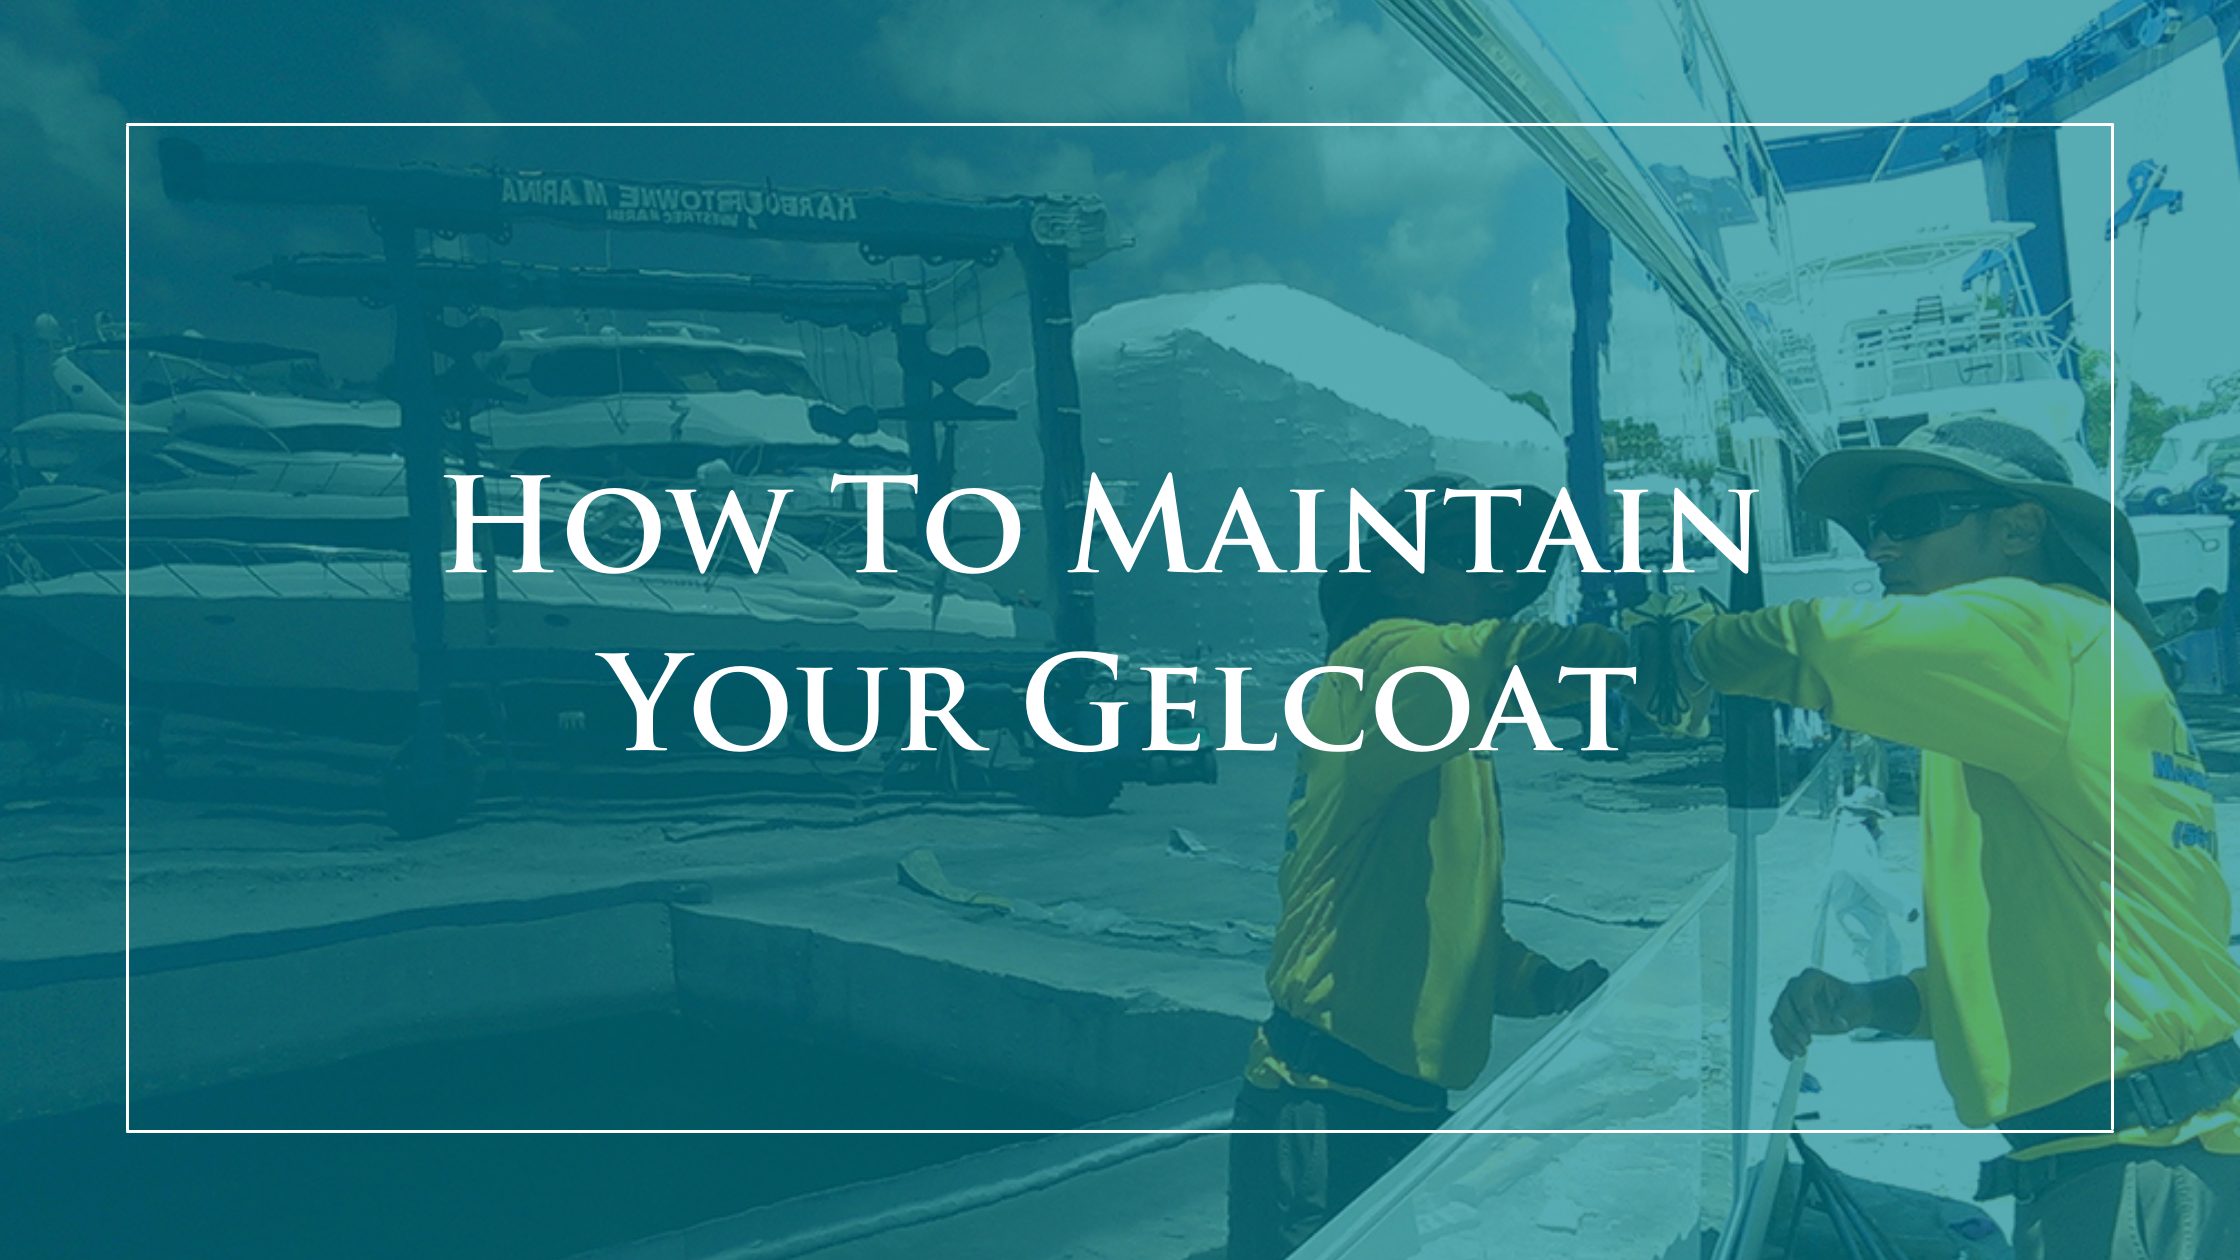 How to Maintain Your Gelcoat